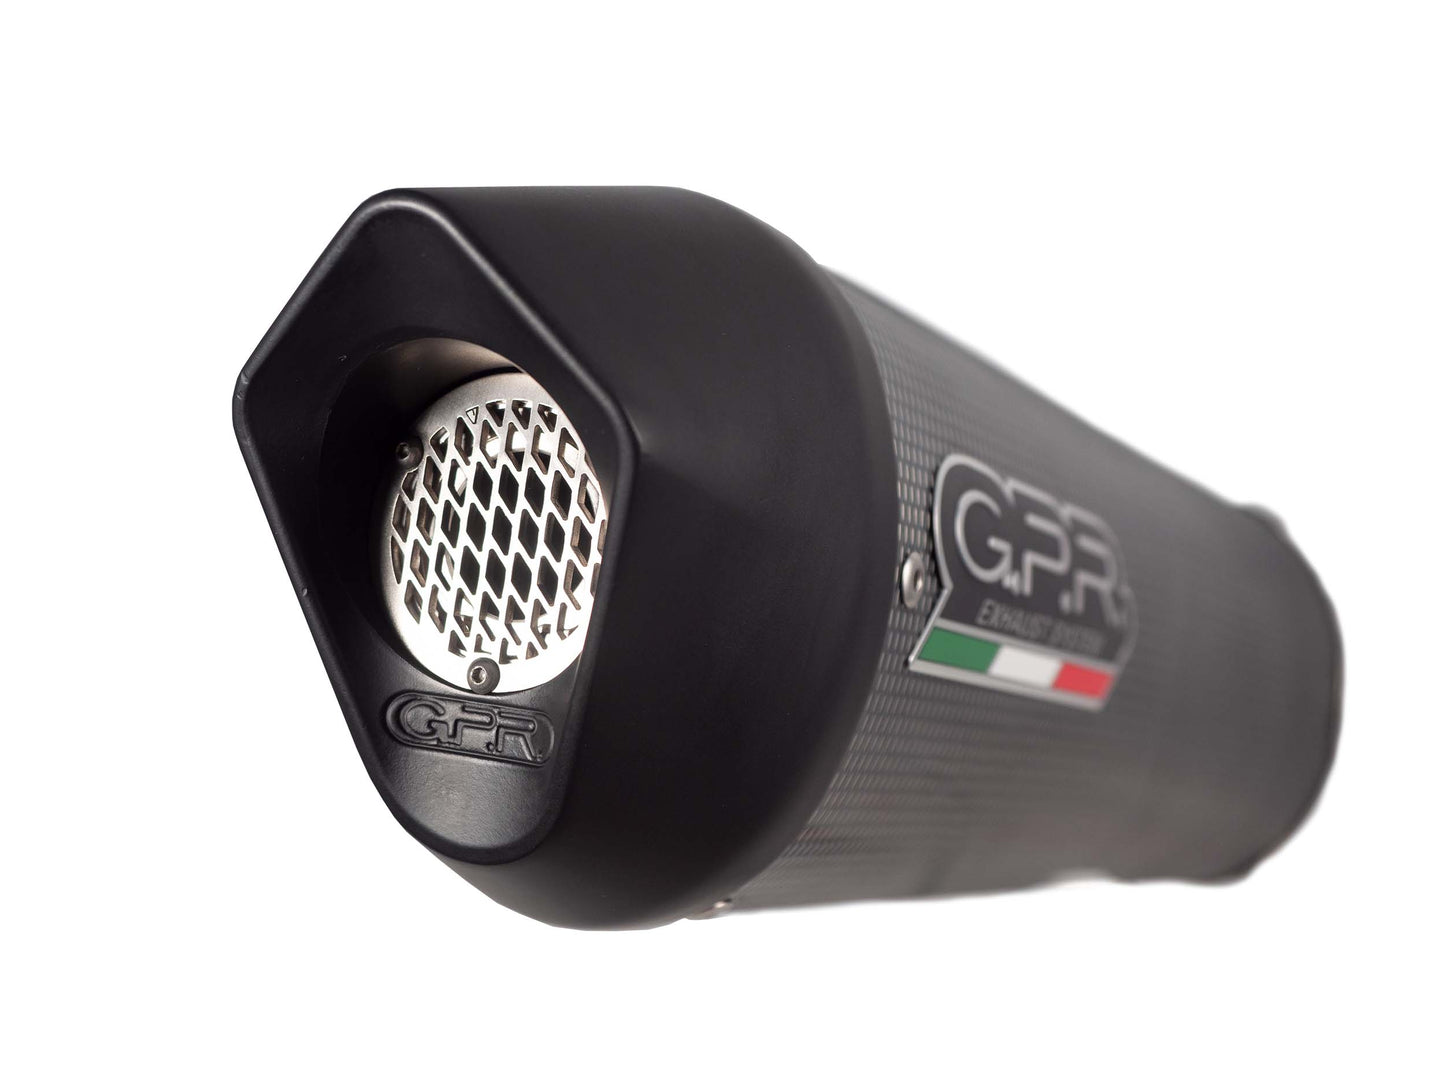 GPR Exhaust System Cf Moto 400 NK 2021-2023, Furore Poppy, Slip-on Exhaust Including Link Pipe and Removable DB Killer